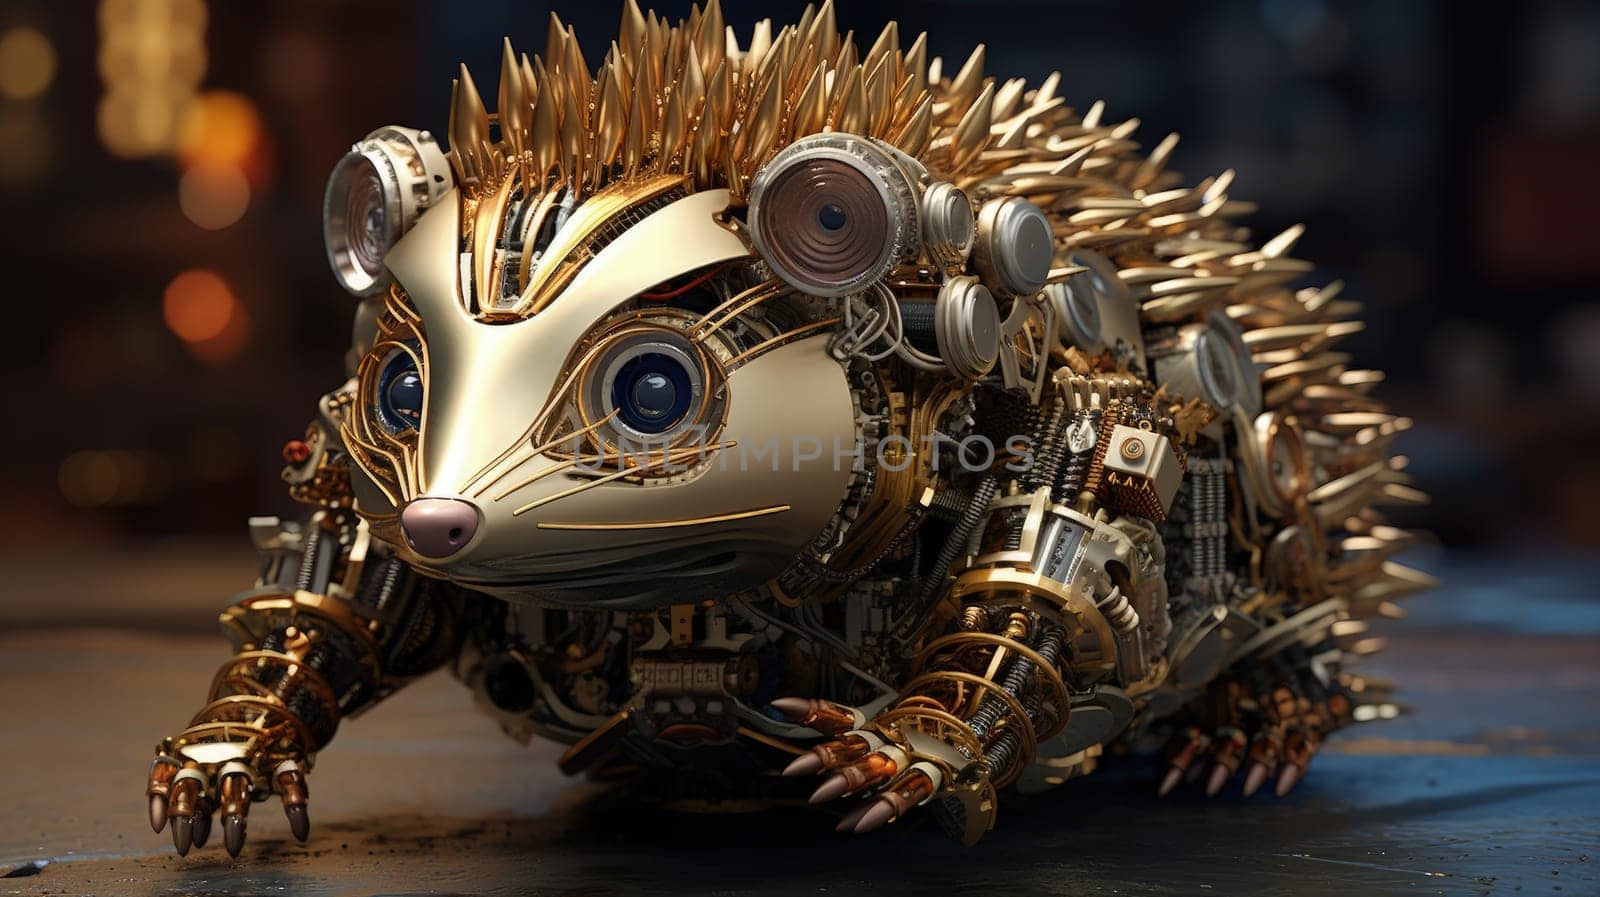 A fascinating depiction of a hedgehog seamlessly integrated with mechanized forms, the fusion of natural spines and metallic components by Kadula